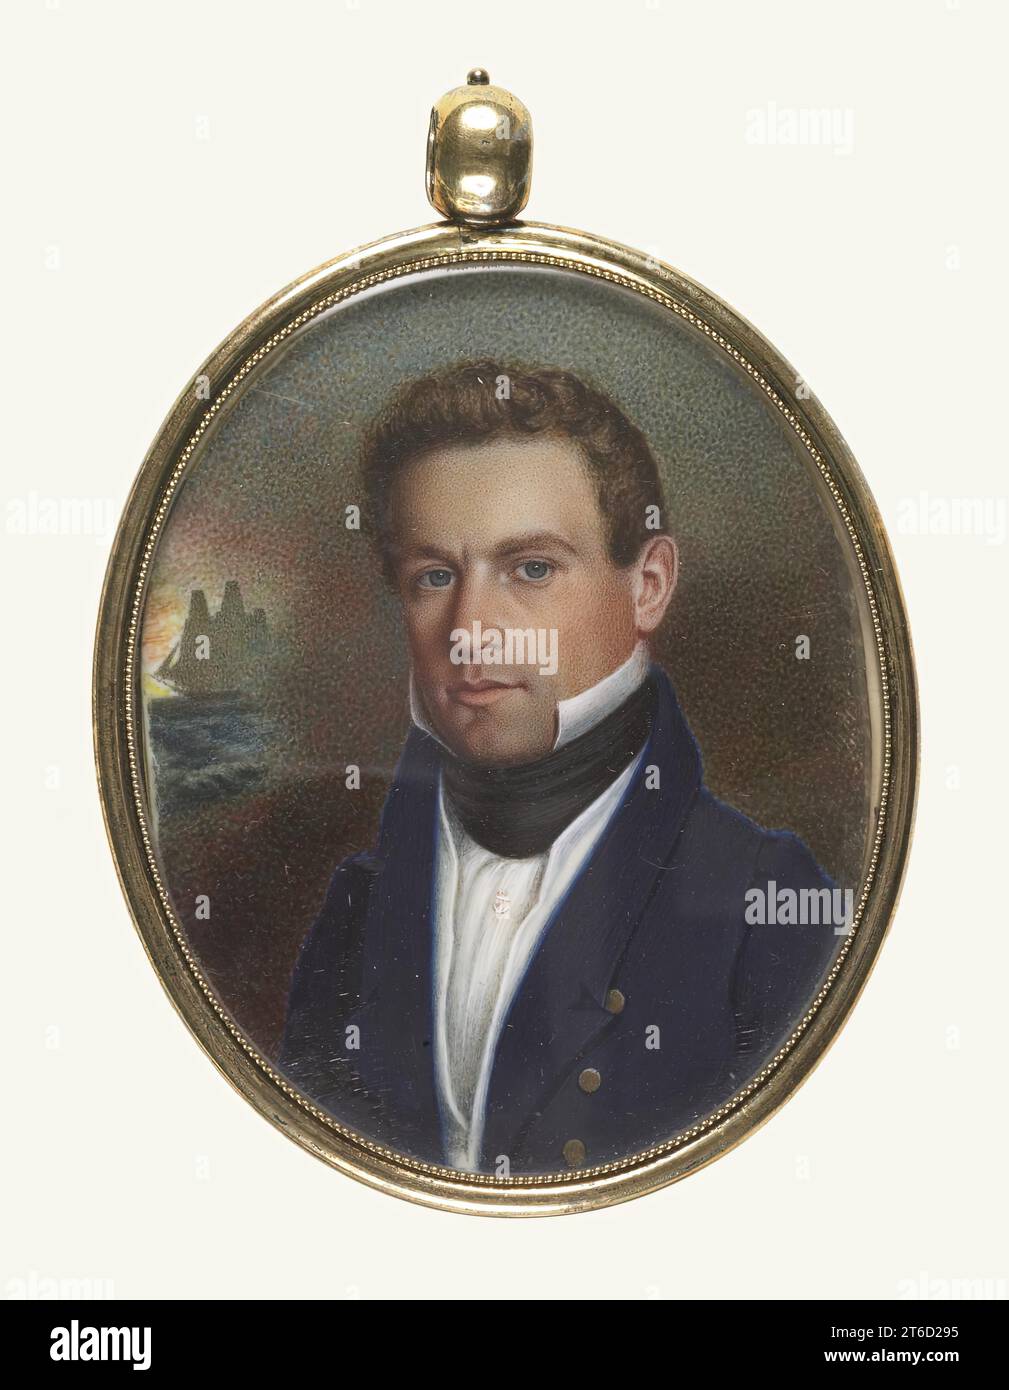 Captain John Robinson of Newburyport, Massachusetts, c1900. Bust-length portrait of Captian Robinson with brown hair, wearing a navy blue coat, white muslin shirt, high white stock and black neckcloth. His cravat is fastened with an anchor shaped pin. He is depicted before a stippled background with a vignette of a ship at the left. The face is also formed from a network of stippled dots, slightly more fine than those that make up the cloudy background. The back has an elaborate decoration of woven hair with cut-gold initials. Stock Photo